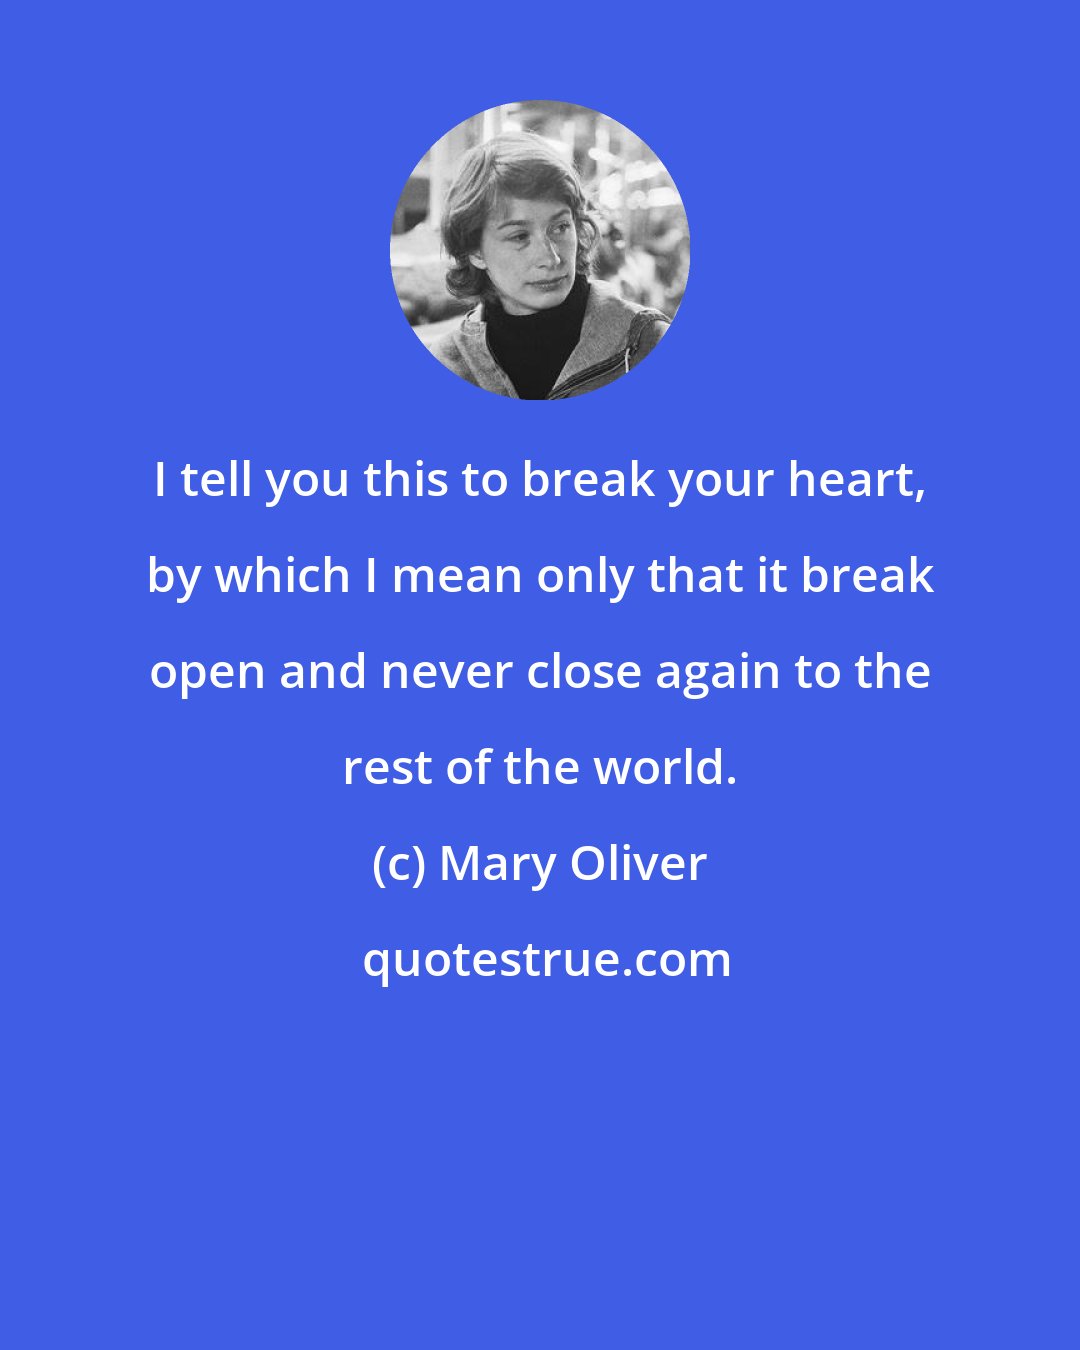 Mary Oliver: I tell you this to break your heart, by which I mean only that it break open and never close again to the rest of the world.